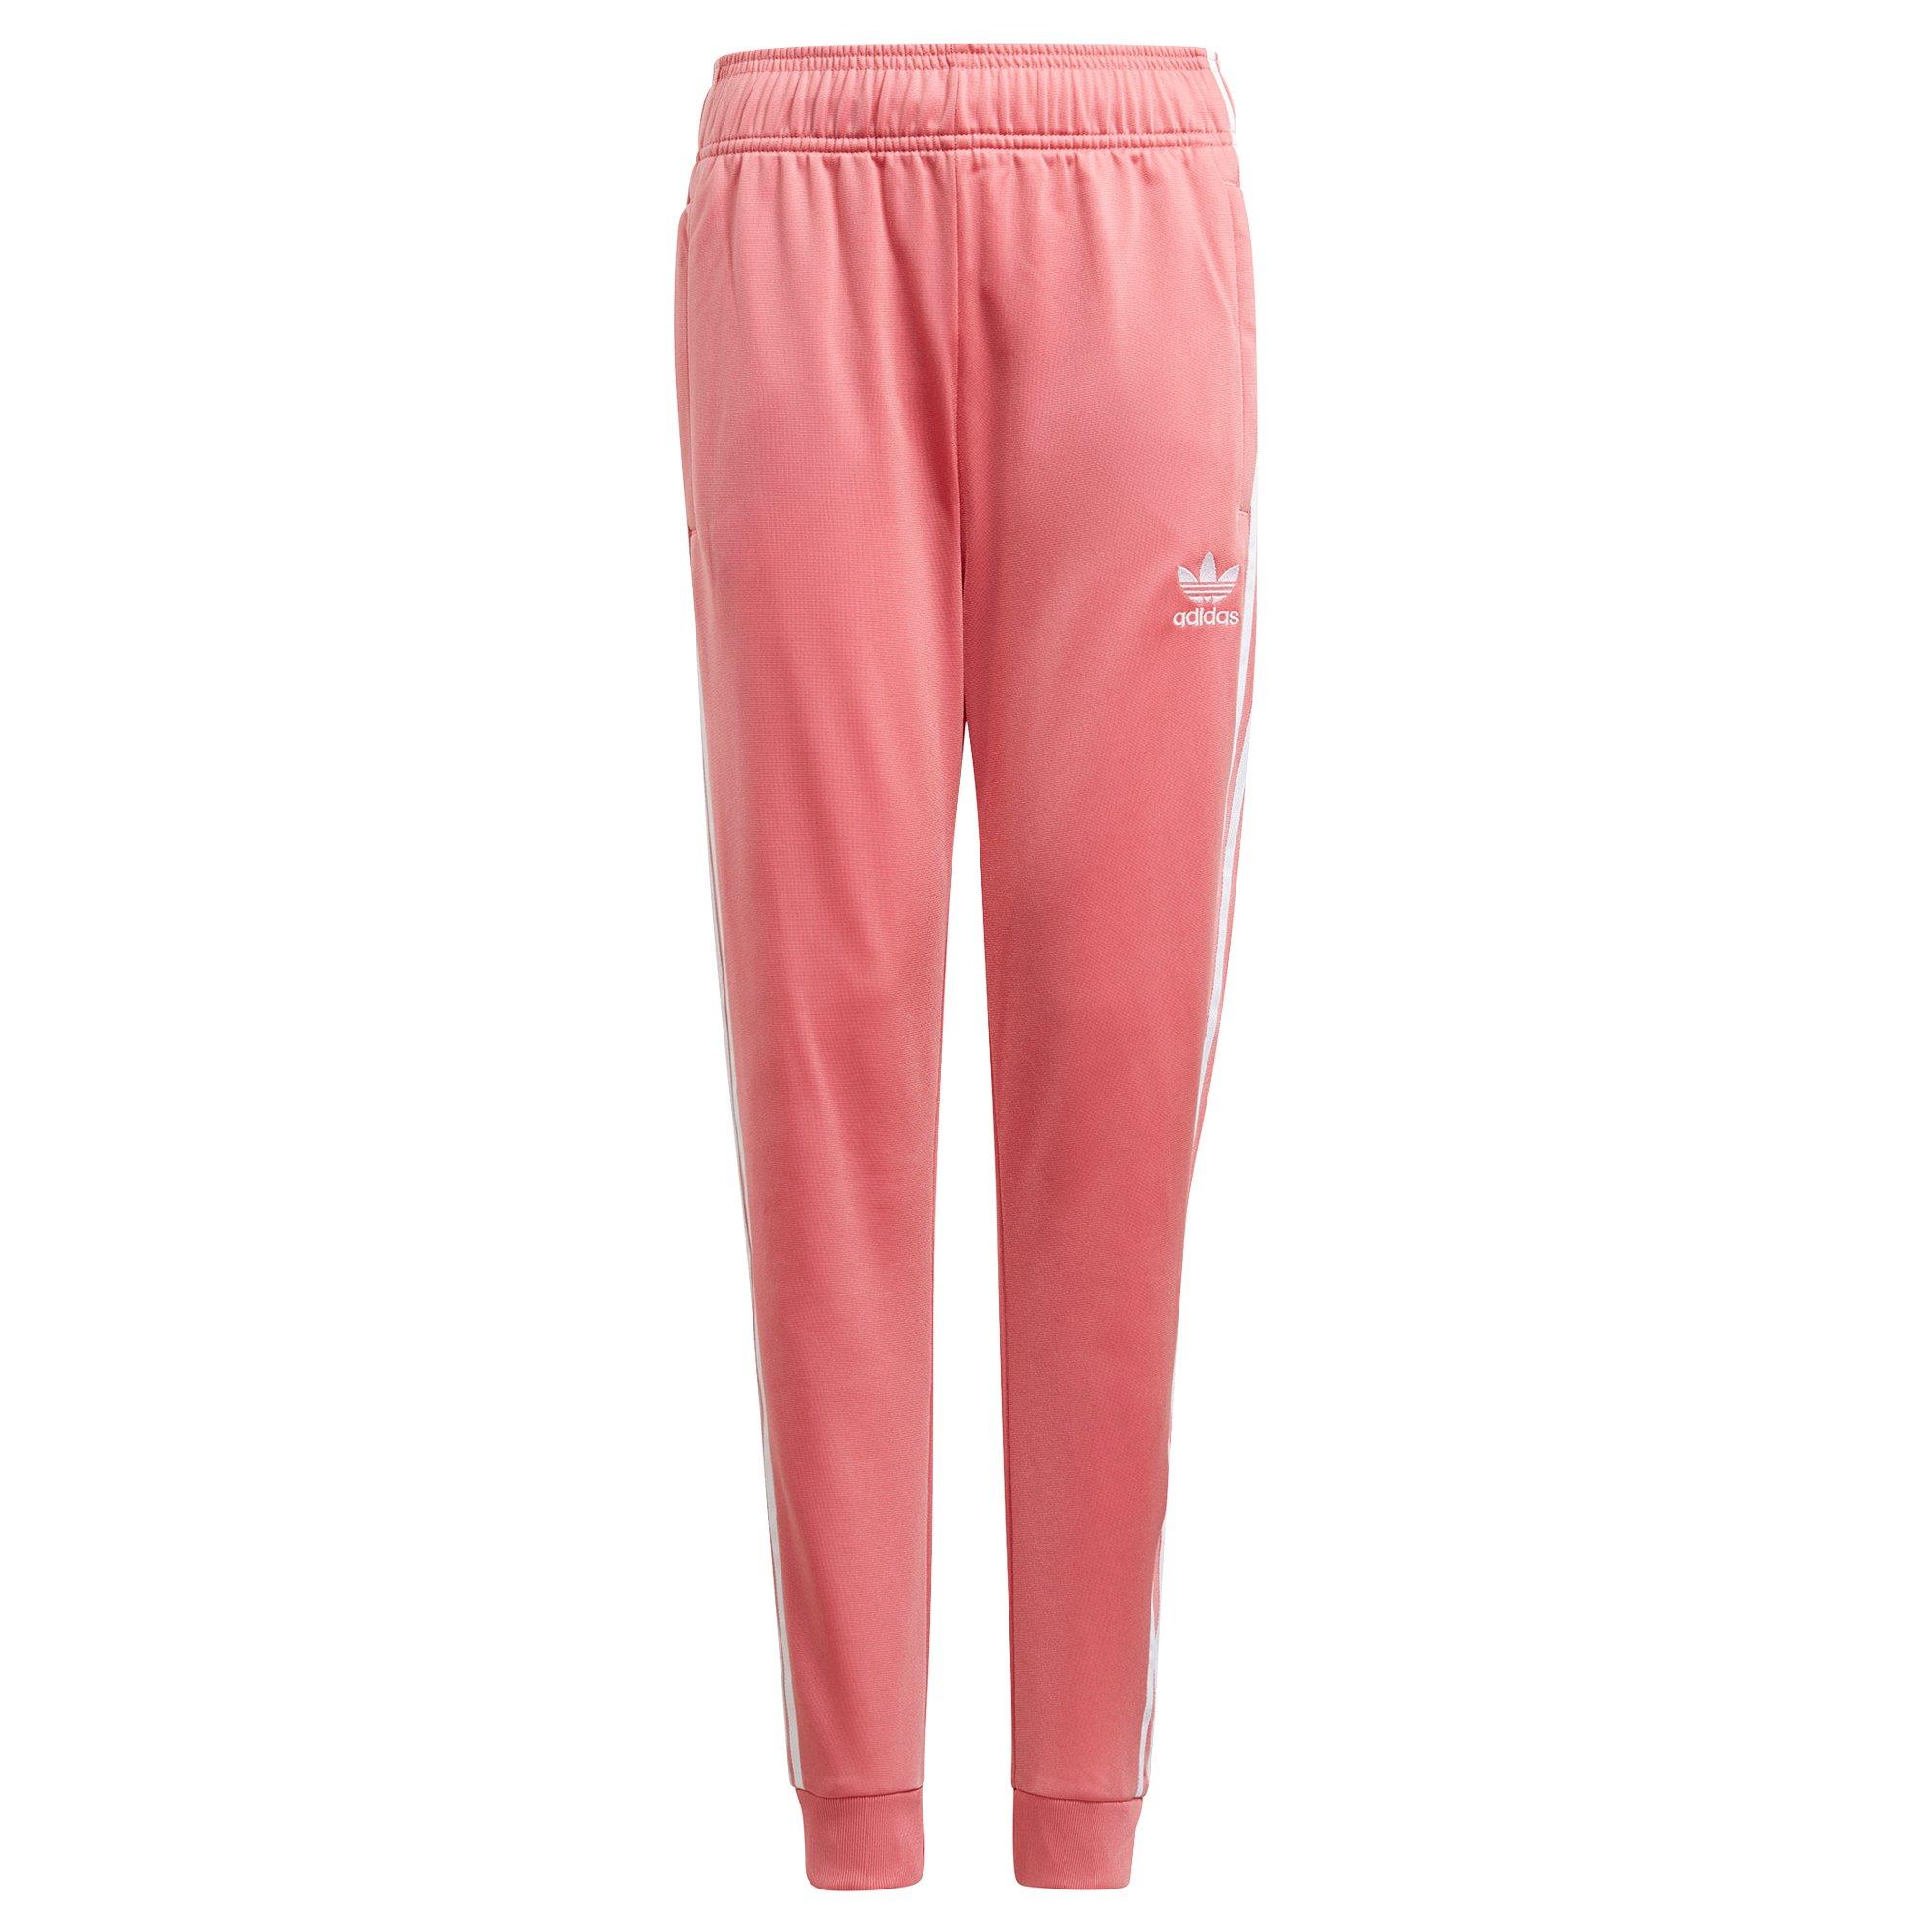 pink and white adidas pants